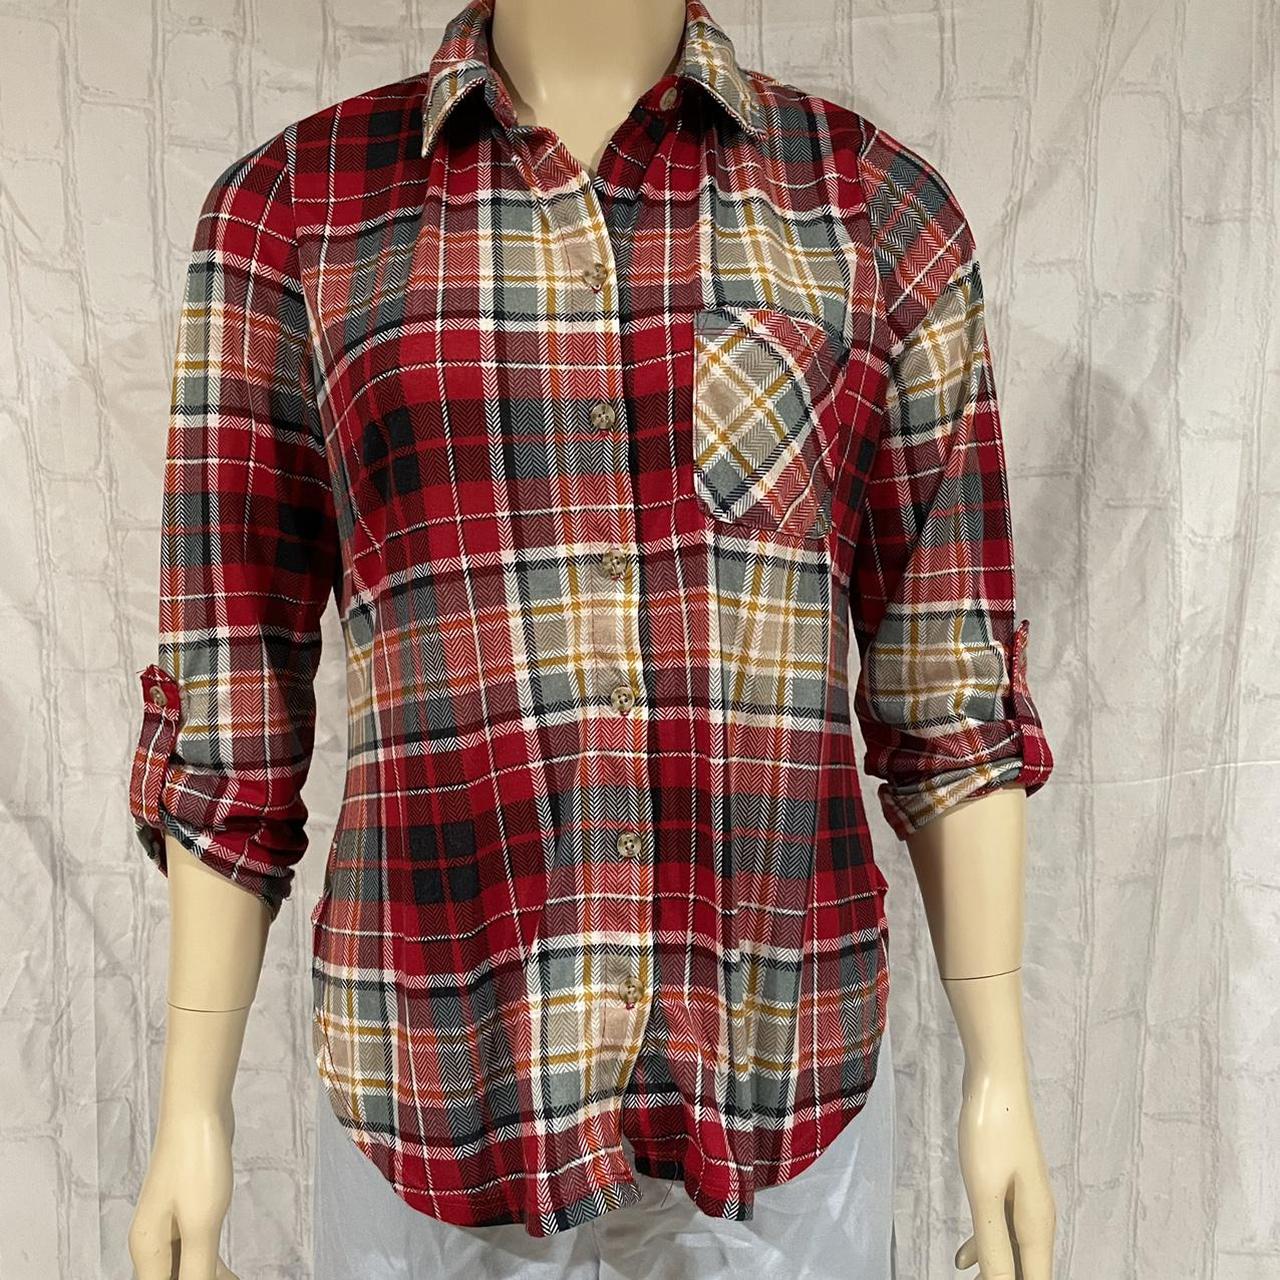 Product Image 1 - Polly & Esther Women’s Plaid